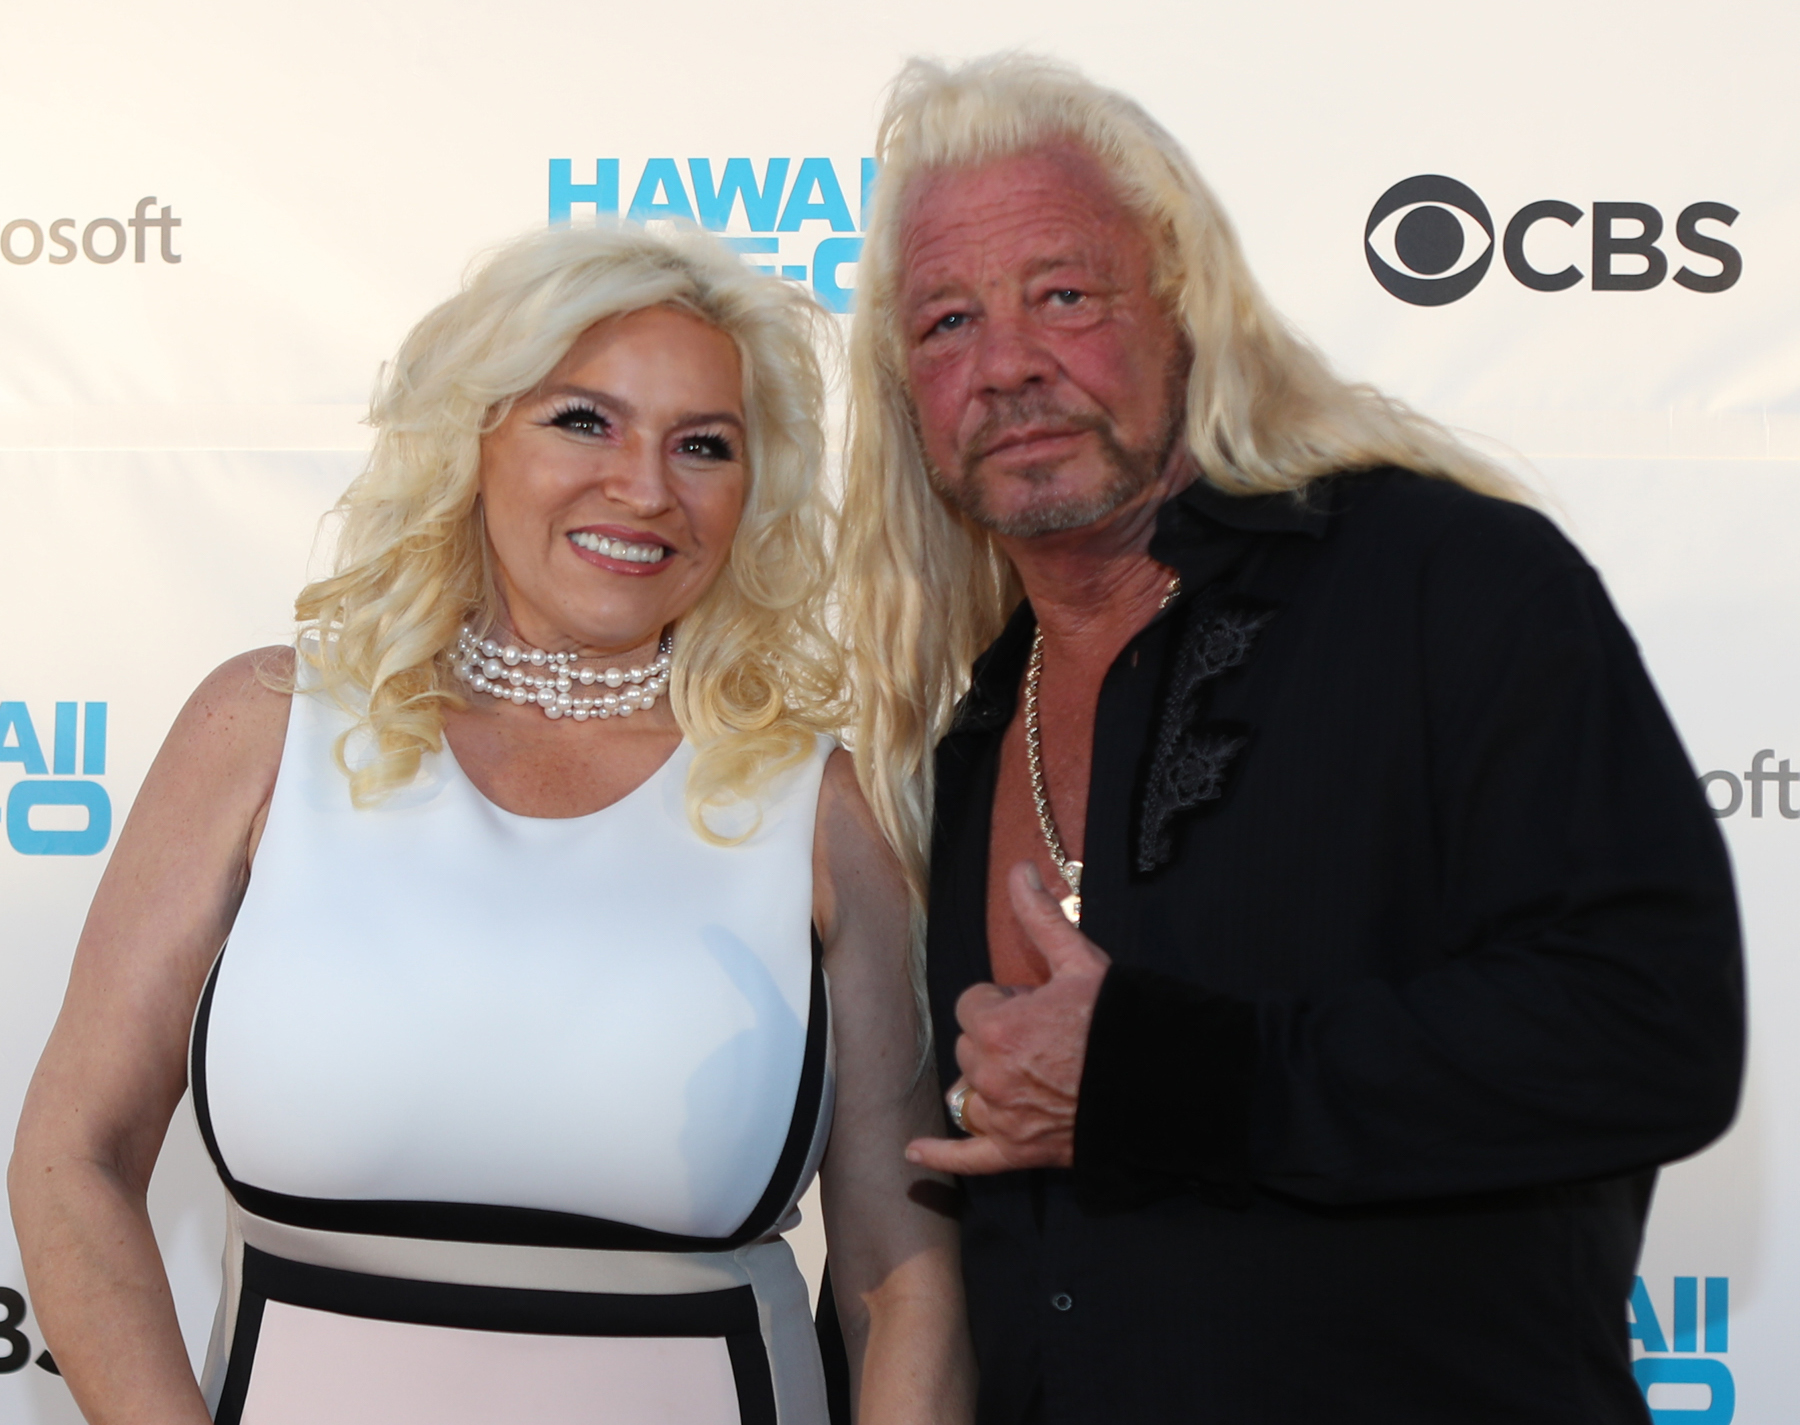 <p><span>Beth Chapman, who starred alongside husband Duane "Dog" Chapman on the hit A&E show "Dog the Bounty Hunter" and its spinoffs for years, died at a hospital in Honolulu, Hawaii, on June 26, 2019, at 51 from complications of cancer. Beth was diagnosed with stage 2 throat cancer in September 2017 and went into remission, but by late 2018, the disease had returned and spread. Beth was Duane's fifth wife. She had two children with Duane, with whom she'd been involved for 15 years before they finally married in 2006.</span></p><p>"I loved her so much," a grieving Duane told Hawaii News Now, sharing that Beth left little notes around the house -- including in pillowcases, on the sink and in his shaving kit -- for him to find in their home after she passed. "I'm gonna see my honey again. That's all we can do is hope." In 2021, he married rancher Francie Frane, a widow who'd also lost her spouse to cancer. "With Francie, I'm allowed to speak about Beth, we speak about her husband. We cry. We hold each other," Duane told TMZ.</p><p>Four years after Beth passed away, <a href="https://www.wonderwall.com/news/reality-tv-star-and-bounty-hunter-reveals-secret-adult-love-child-755799.article">Dog revealed an unexpected blessing</a>: He'd recently learned that decades earlier, he fathered a son who was born on the same day Beth died, June 26. "For the last four years, this day was a terrible reminder of one of the greatest losses of my life," Dog, a father of 13 with multiple women, wrote on Instagram in 2023. "But God redeemed this day when I discovered my son Jon, who I just met recently, was born on this day. So now instead of sorrow, this day has a new meaning." </p>